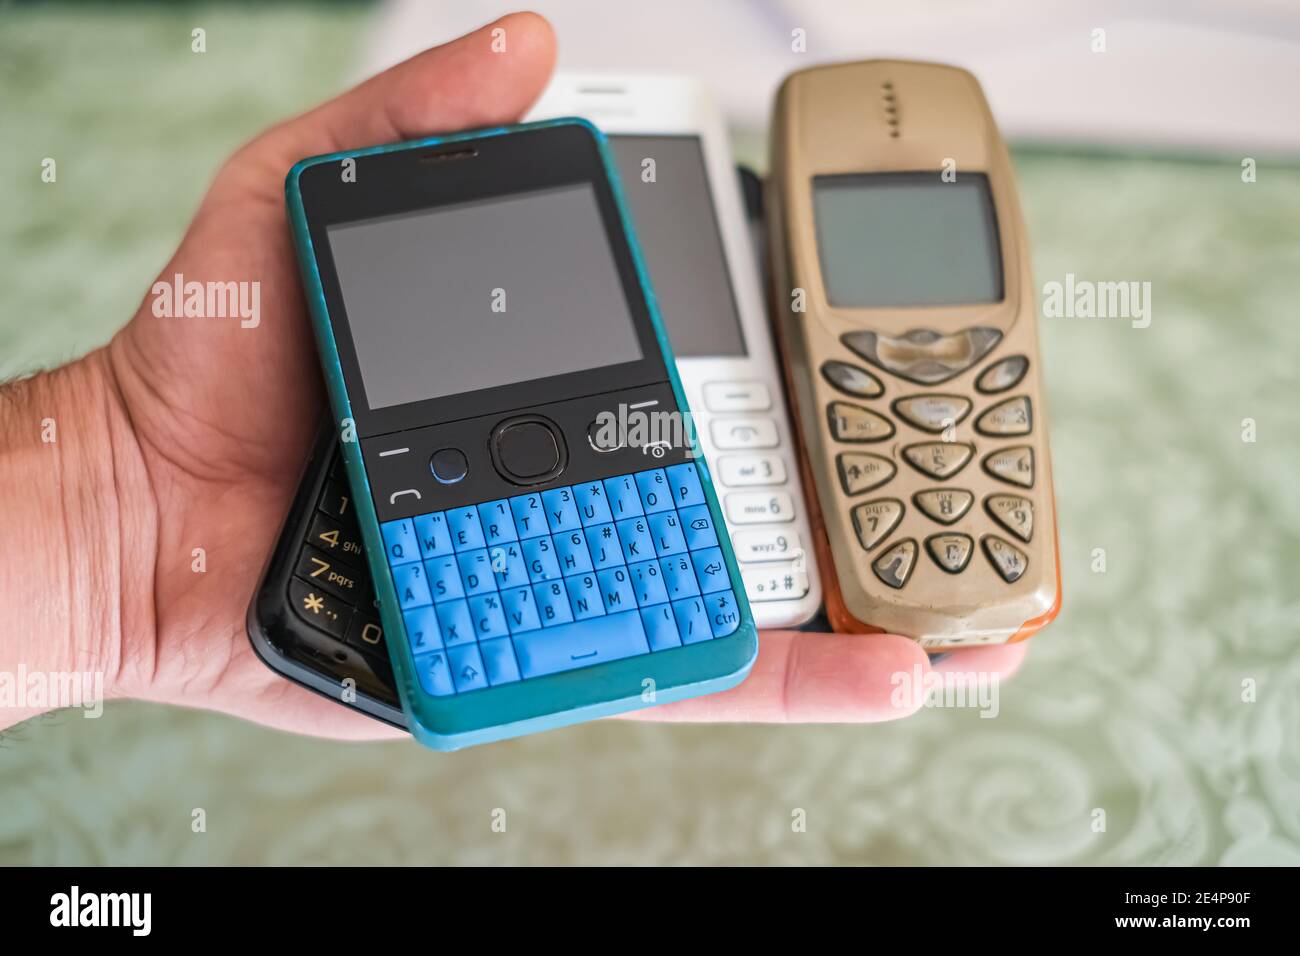 Man hand while hold pile of old gen mobile phones,technology concept Stock Photo